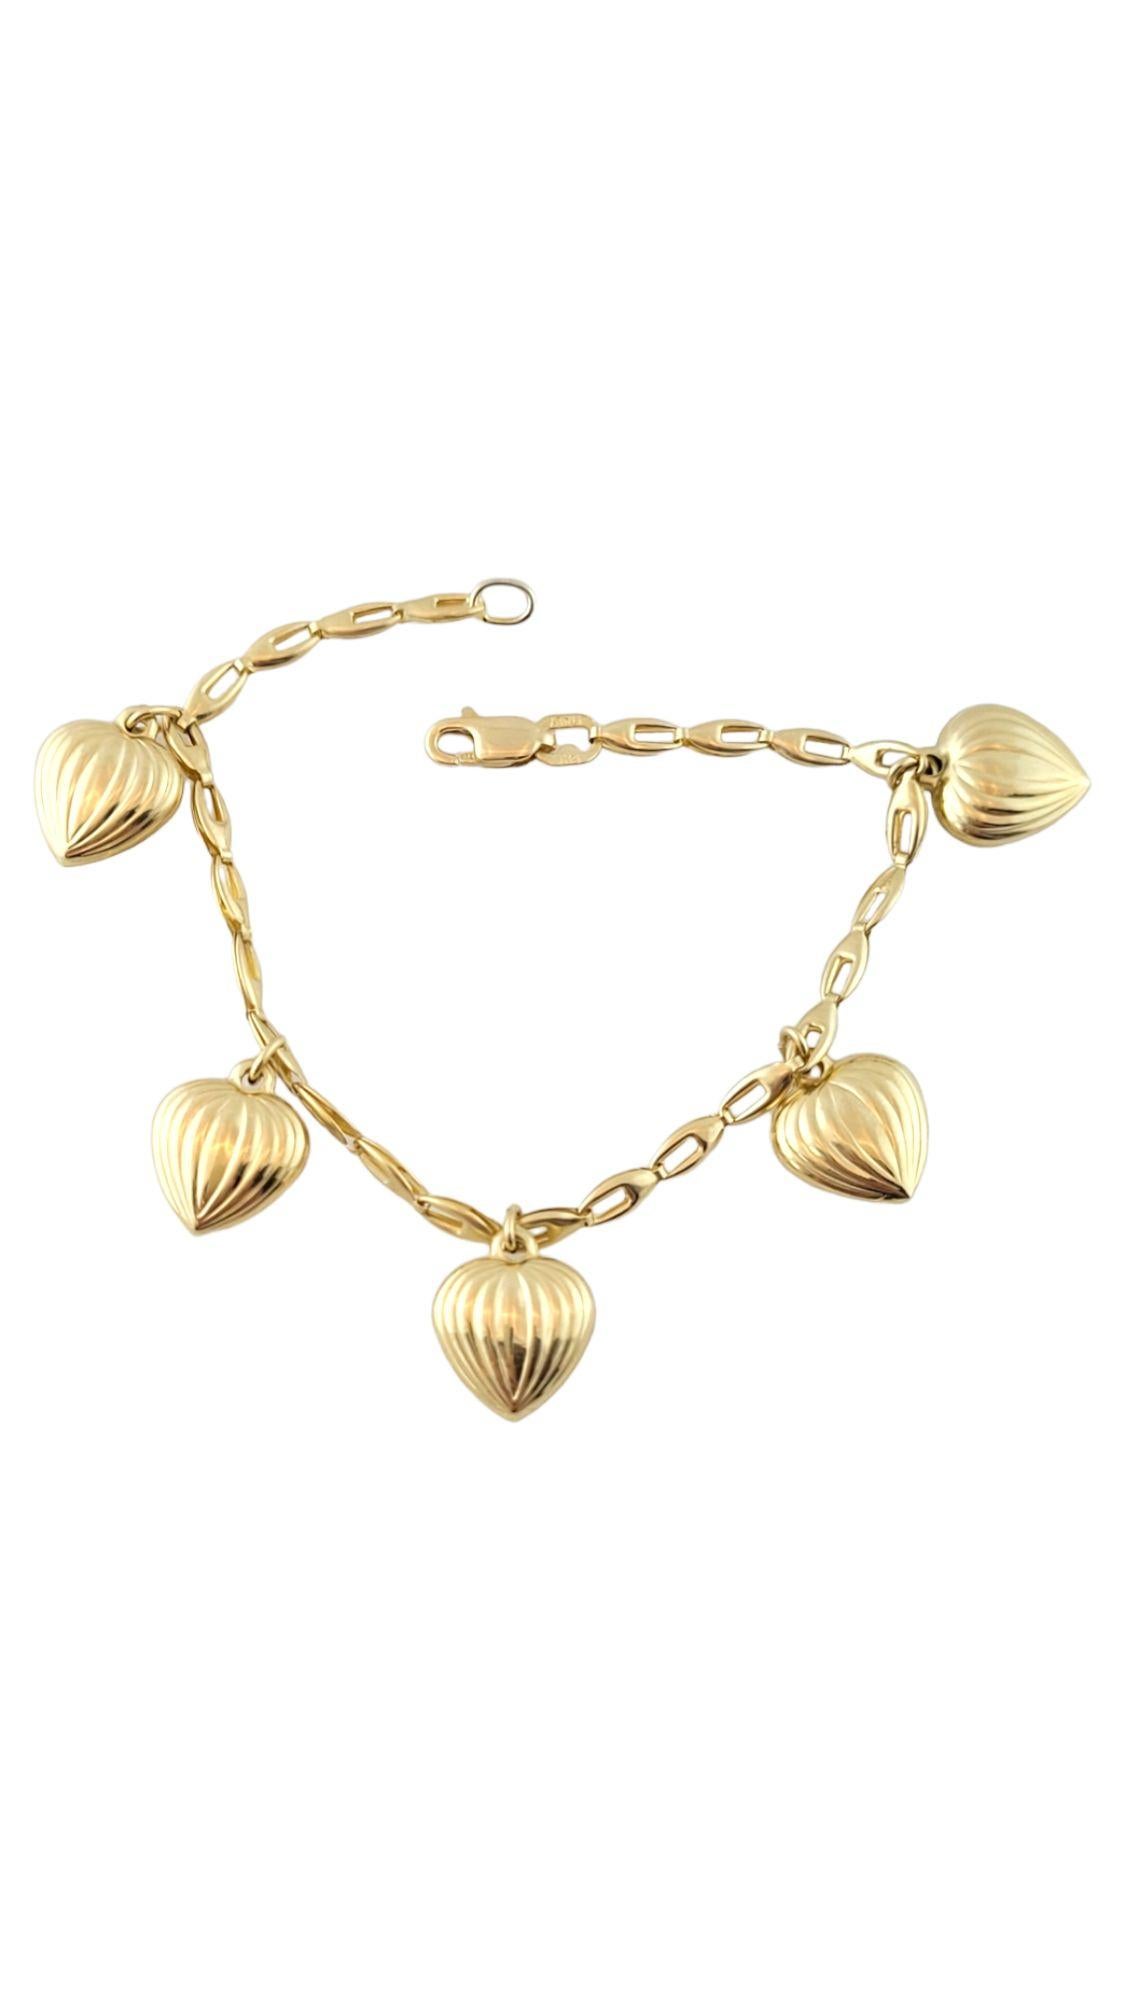 This beautiful 14K gold charm bracelet is decorated with 5 adorable heart charms!

Bracelet size: 61/4